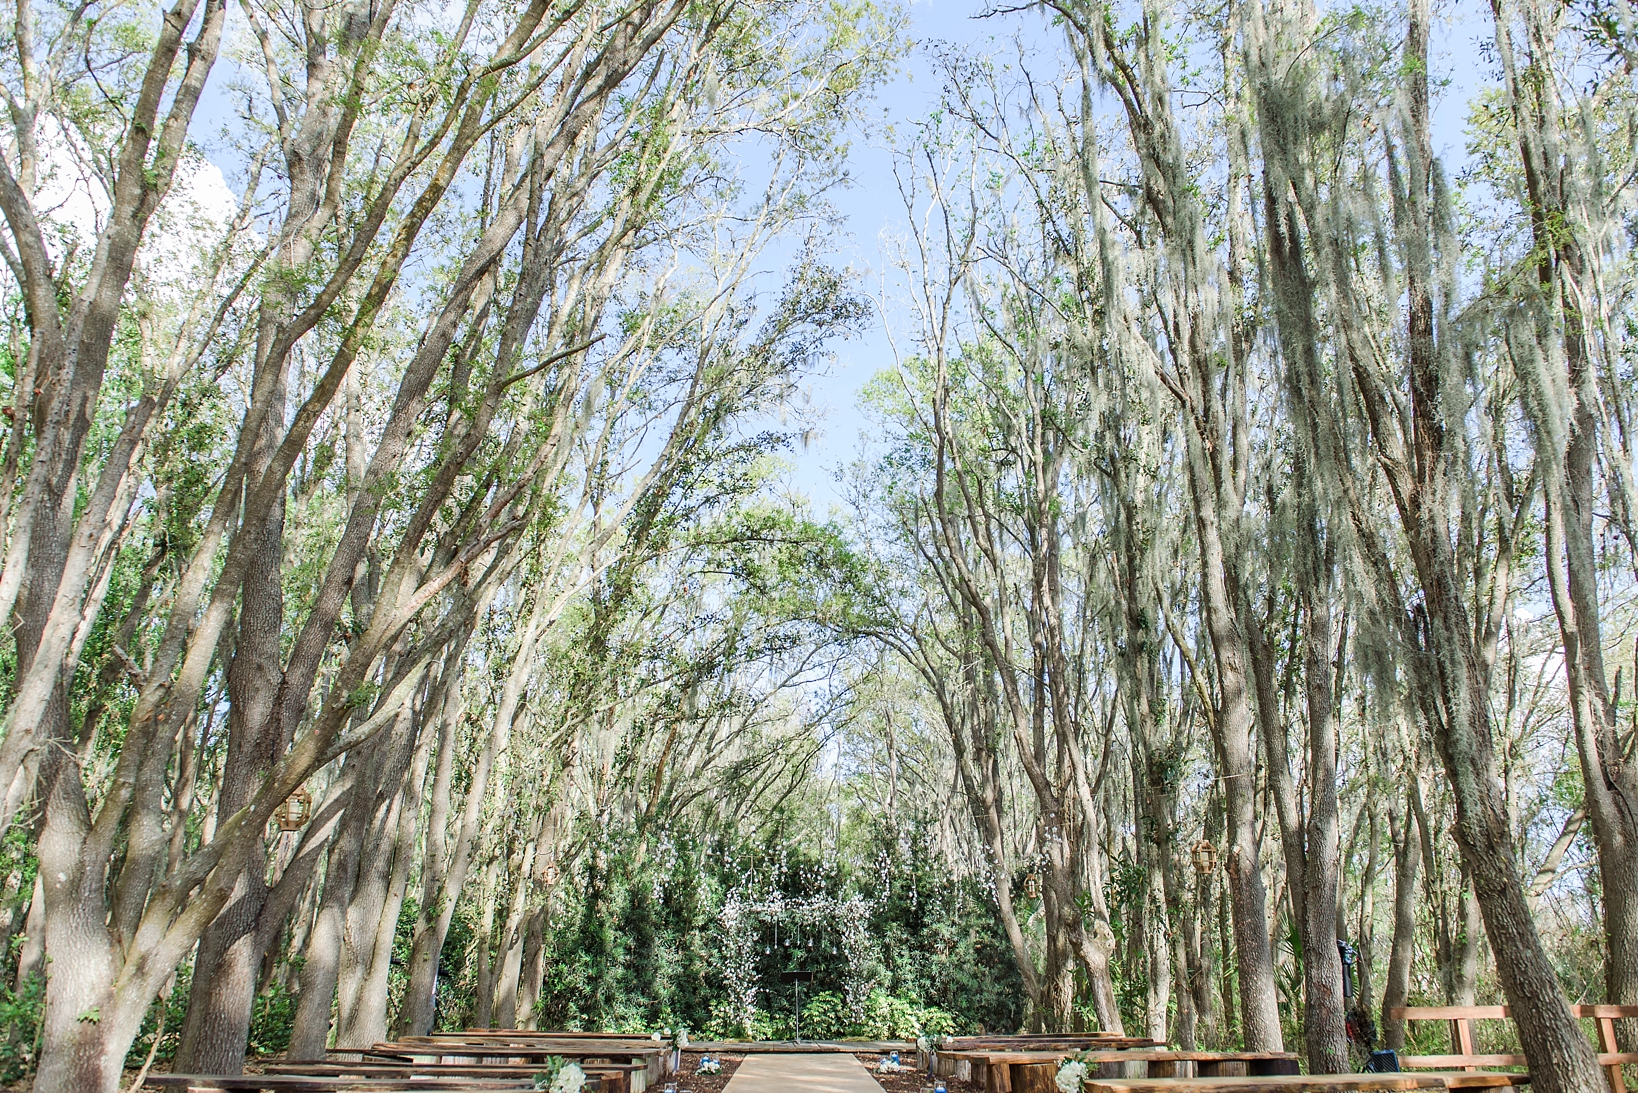 The amazing tree lined ceremony space at the florida rustic barn wedding venue in Plant City, FL by Sarah & Ben Photography